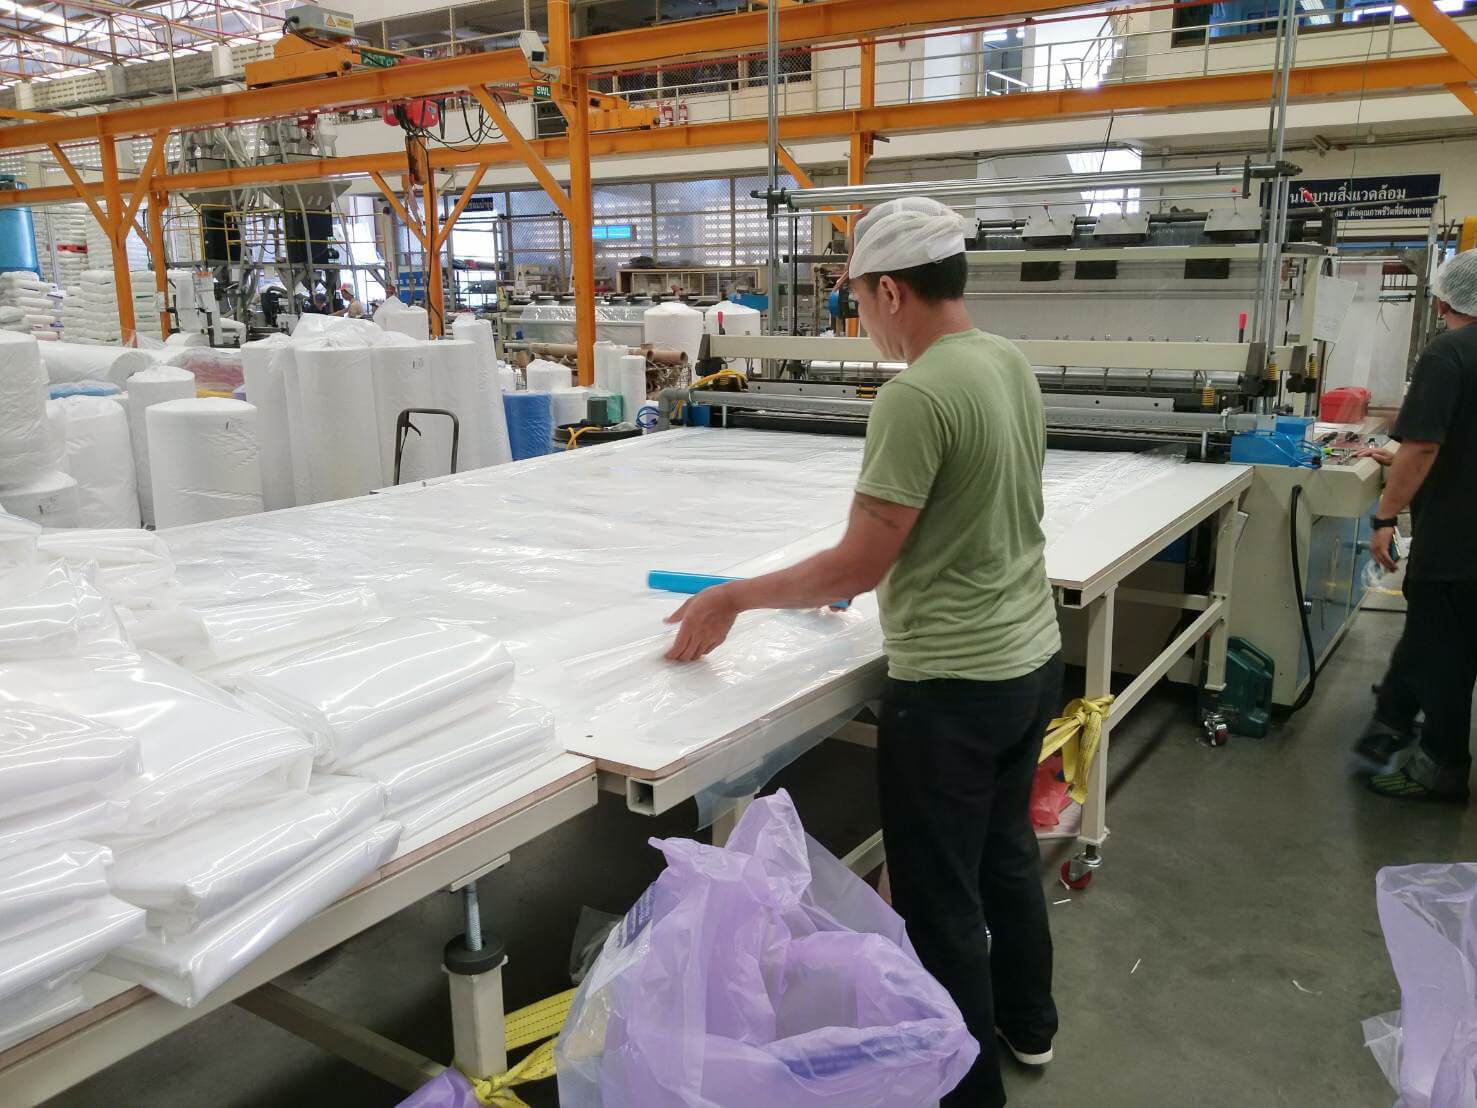 Our Thailand customer ordered a Extra Long Flat Bag Making Machine in order to satisfy the demand to produce bed bags.